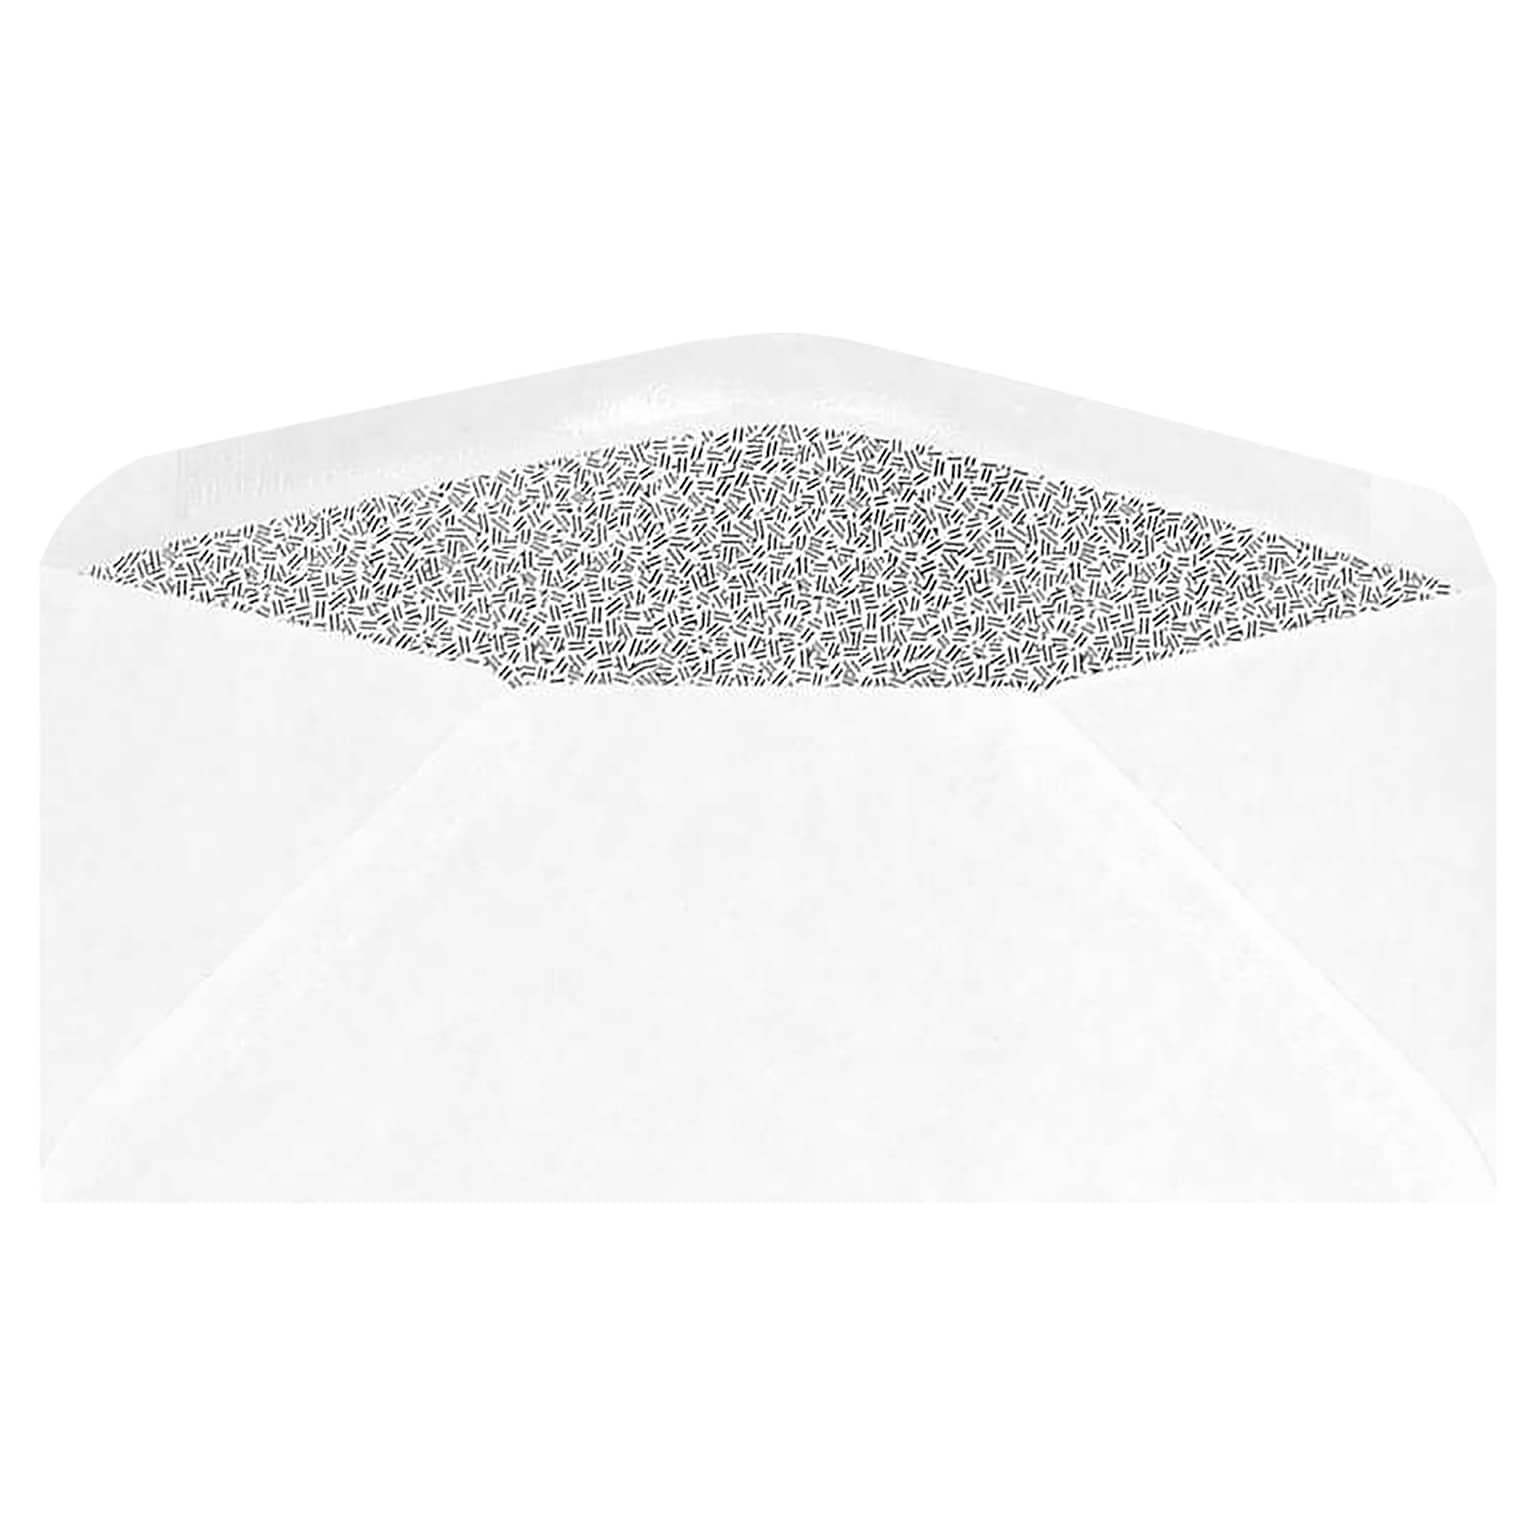 LUX Moistenable Glue Security Tinted Business Envelope, 3 7/8 x 8 7/8, 24lb. White, 1000/Pack (61538-1M)